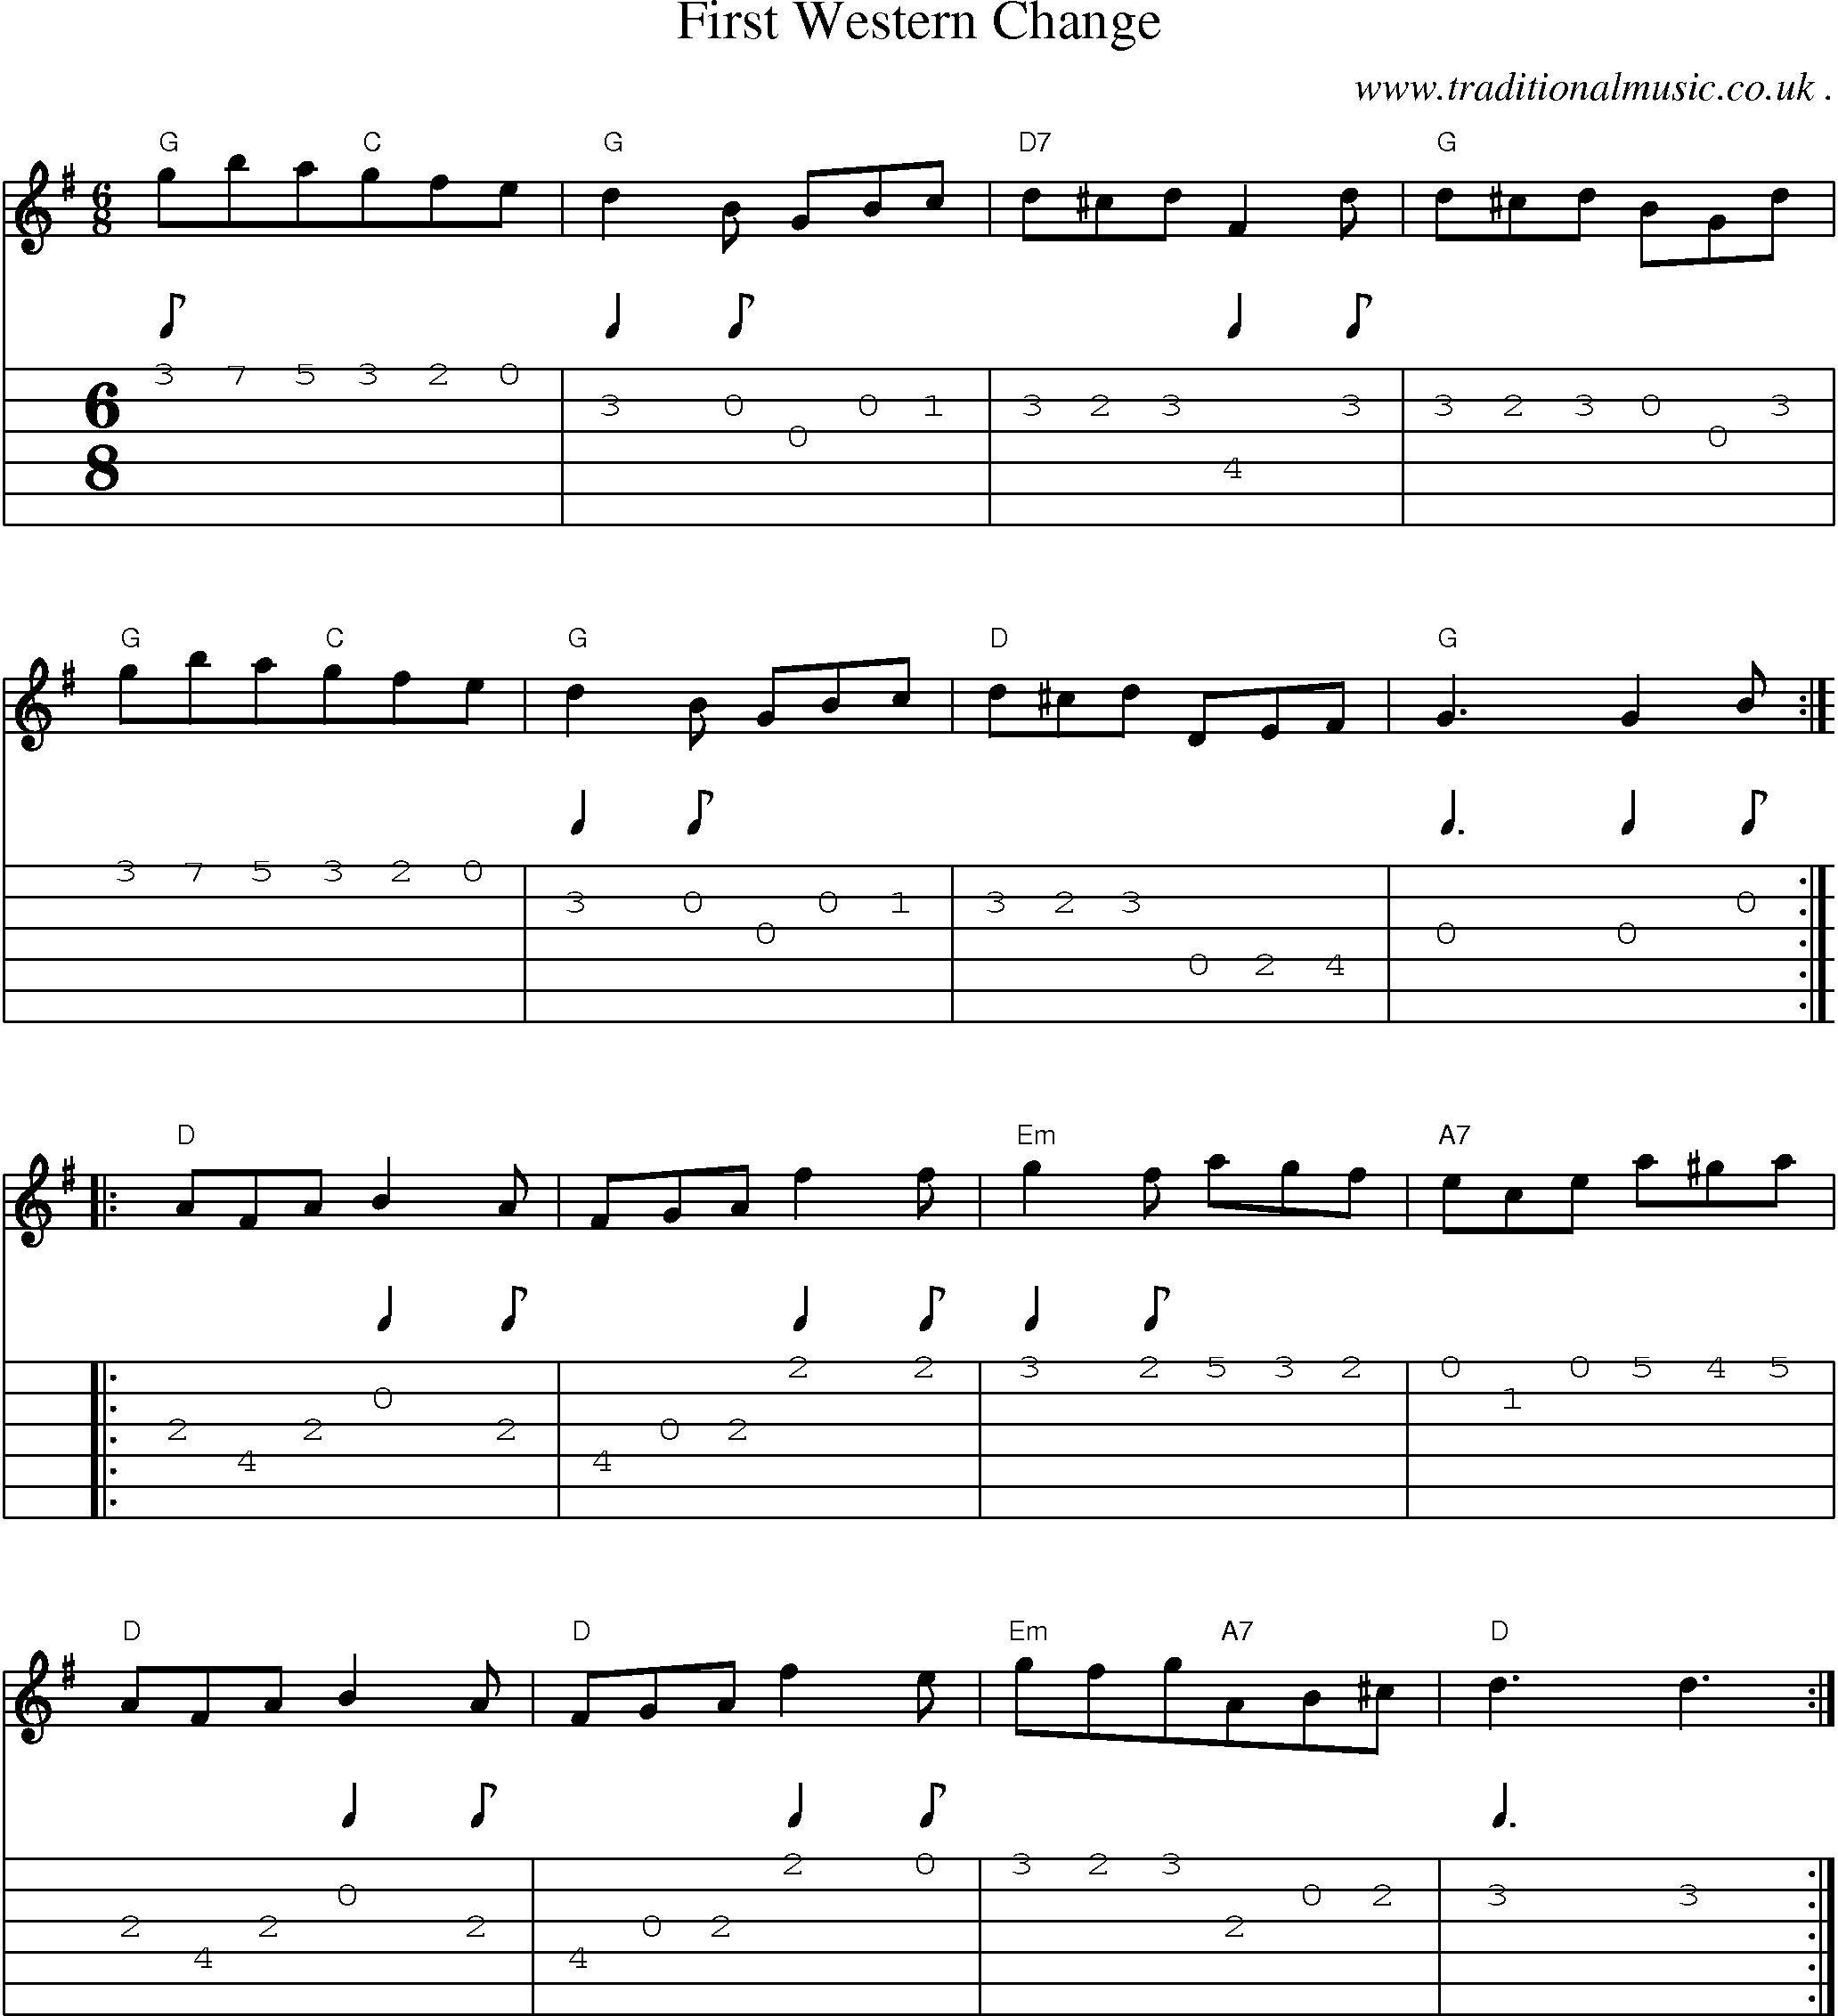 Sheet-Music and Guitar Tabs for First Western Change